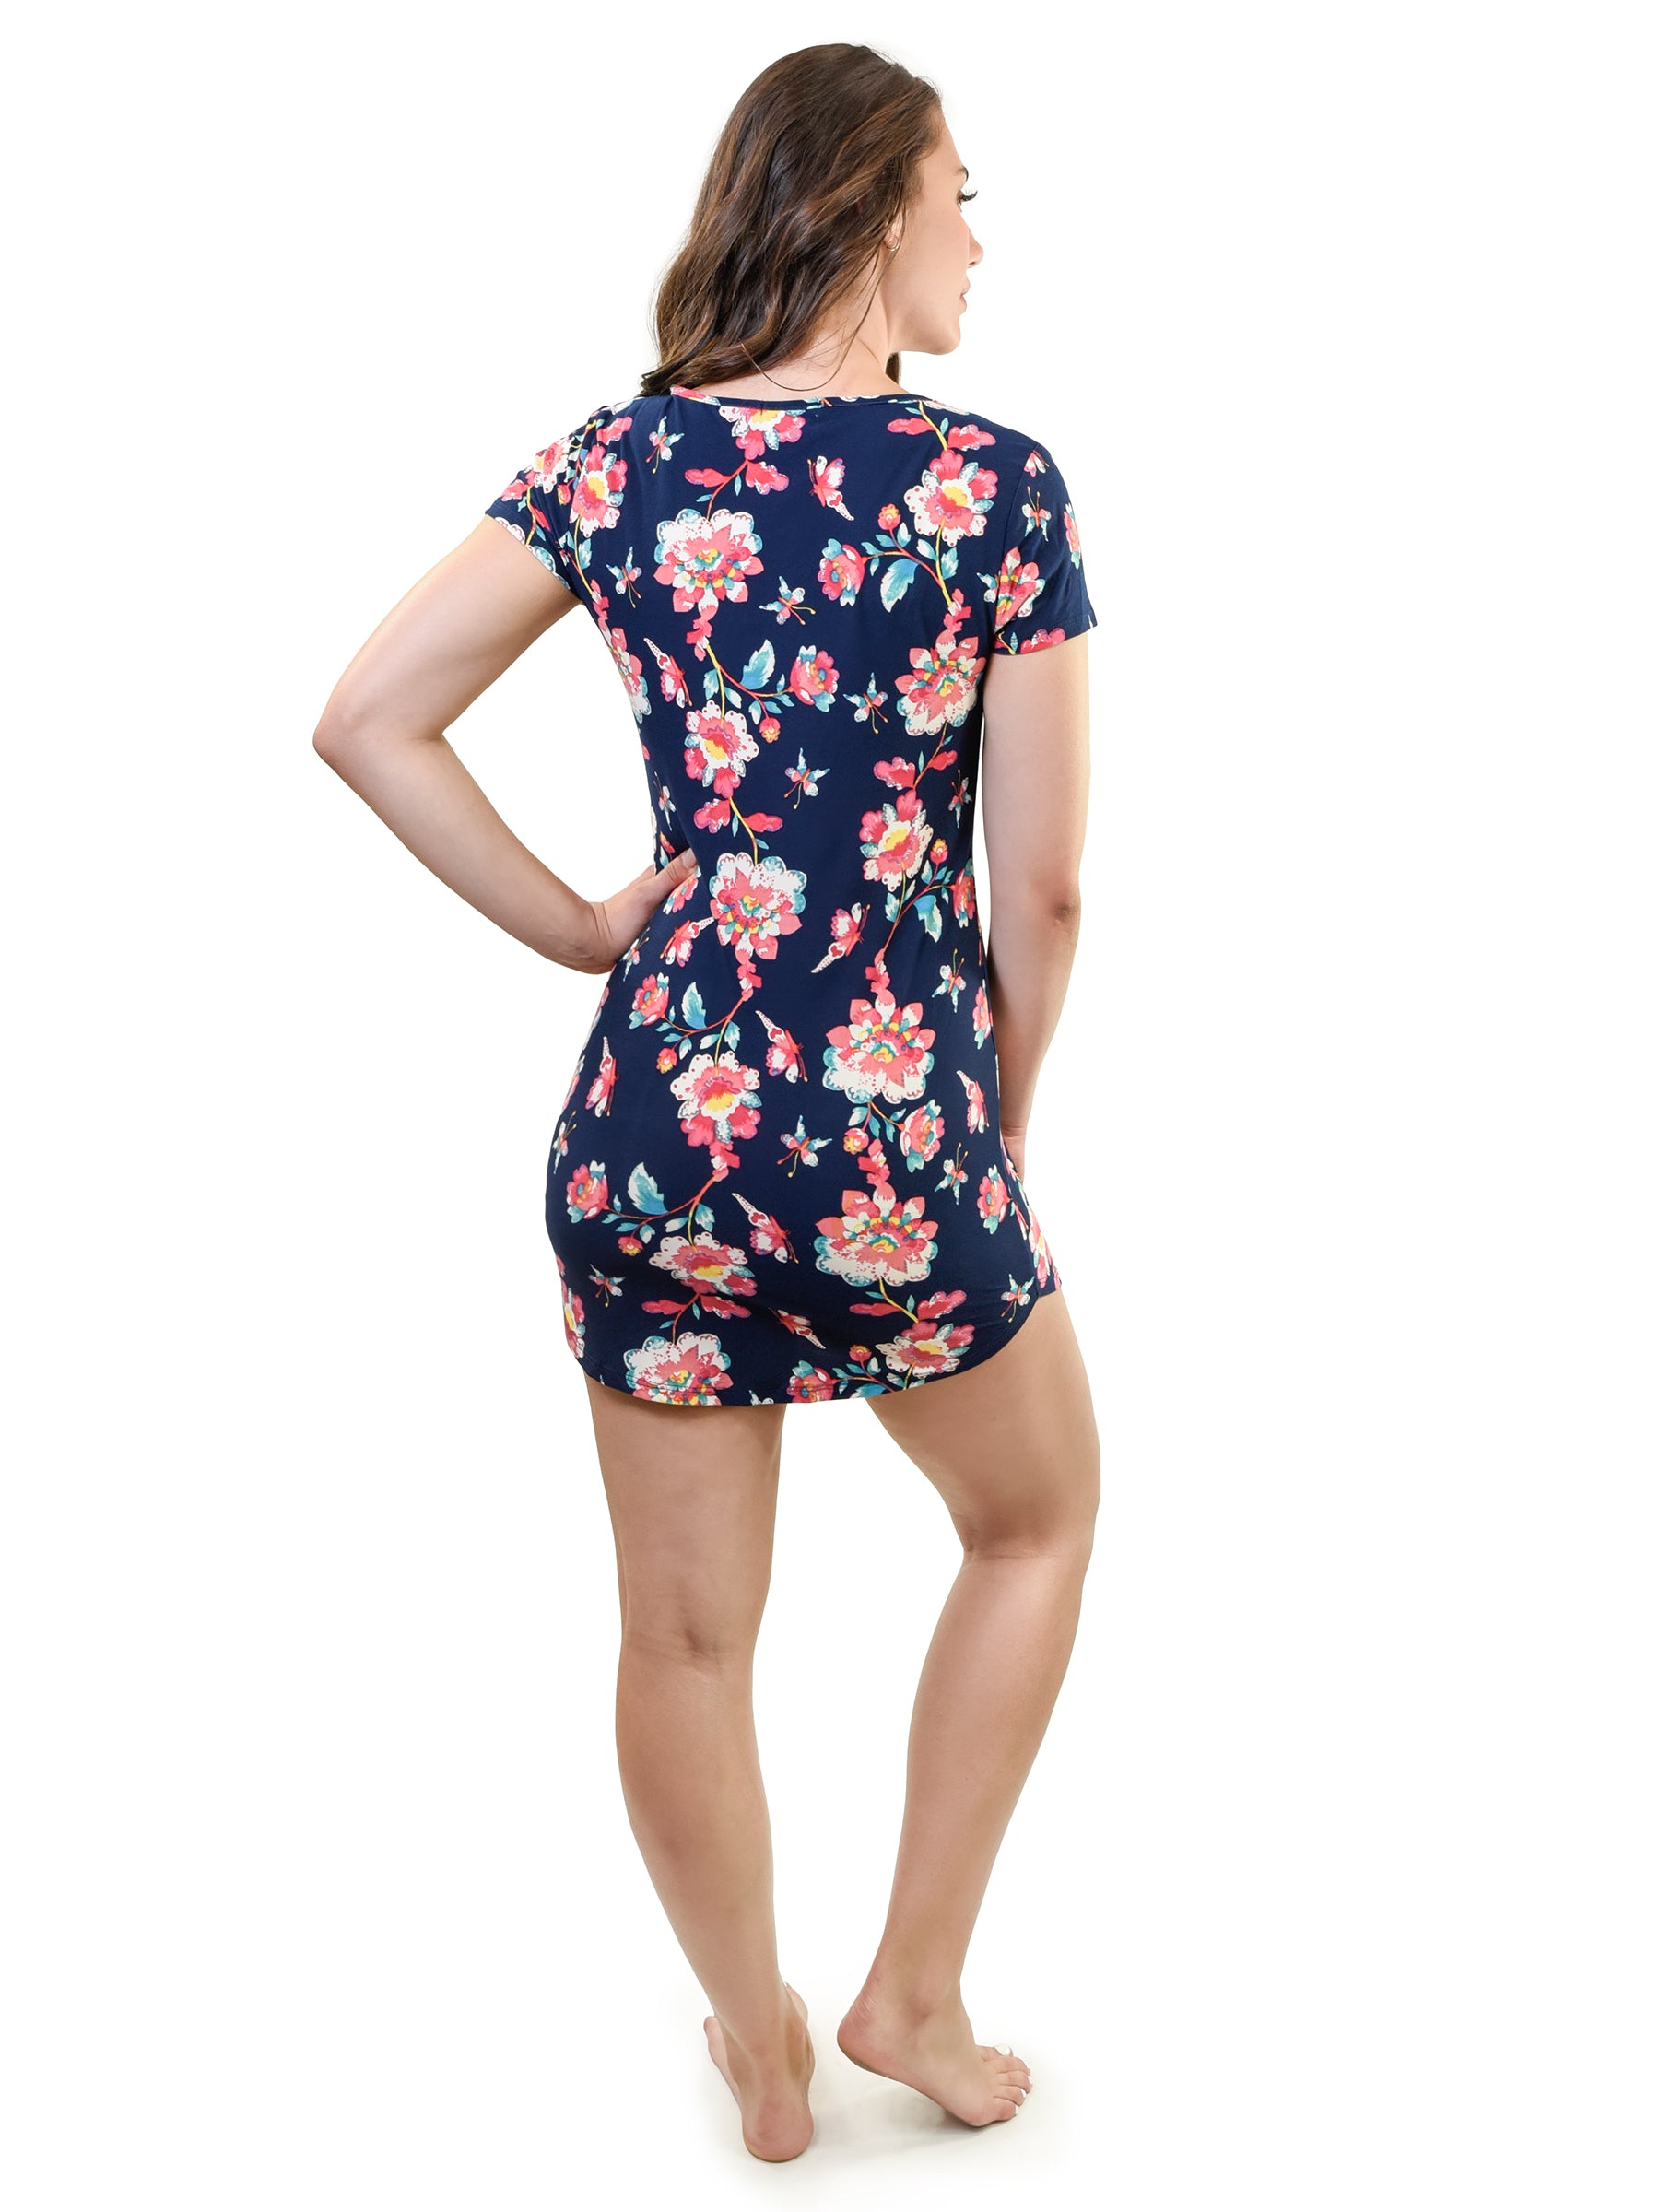 Young USA® Women's Comfy T-Shirt Dress in Navy with Pink Flowers